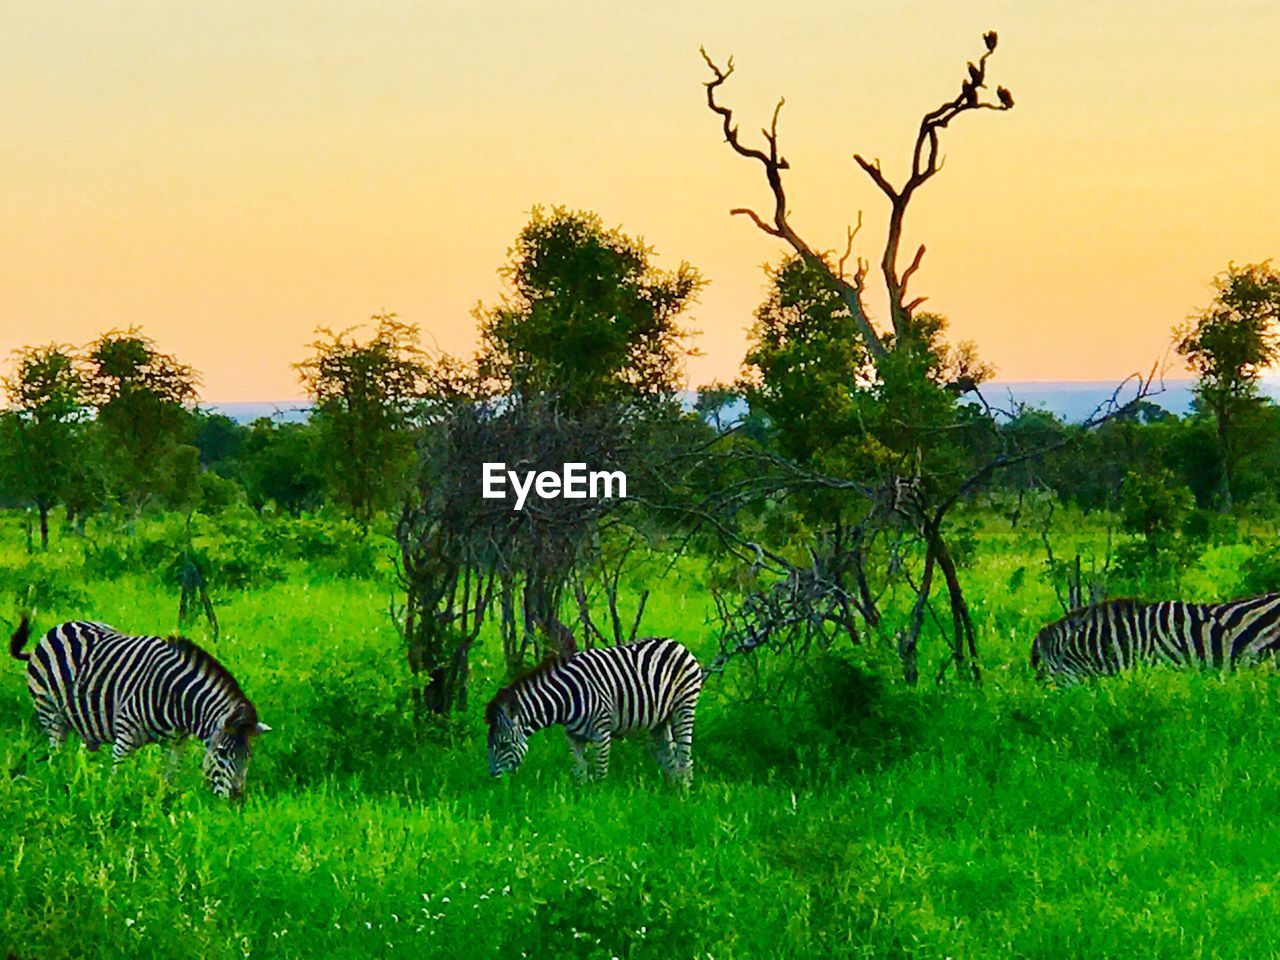 VIEW OF ZEBRA ON GRASS AGAINST SKY DURING SUNSET